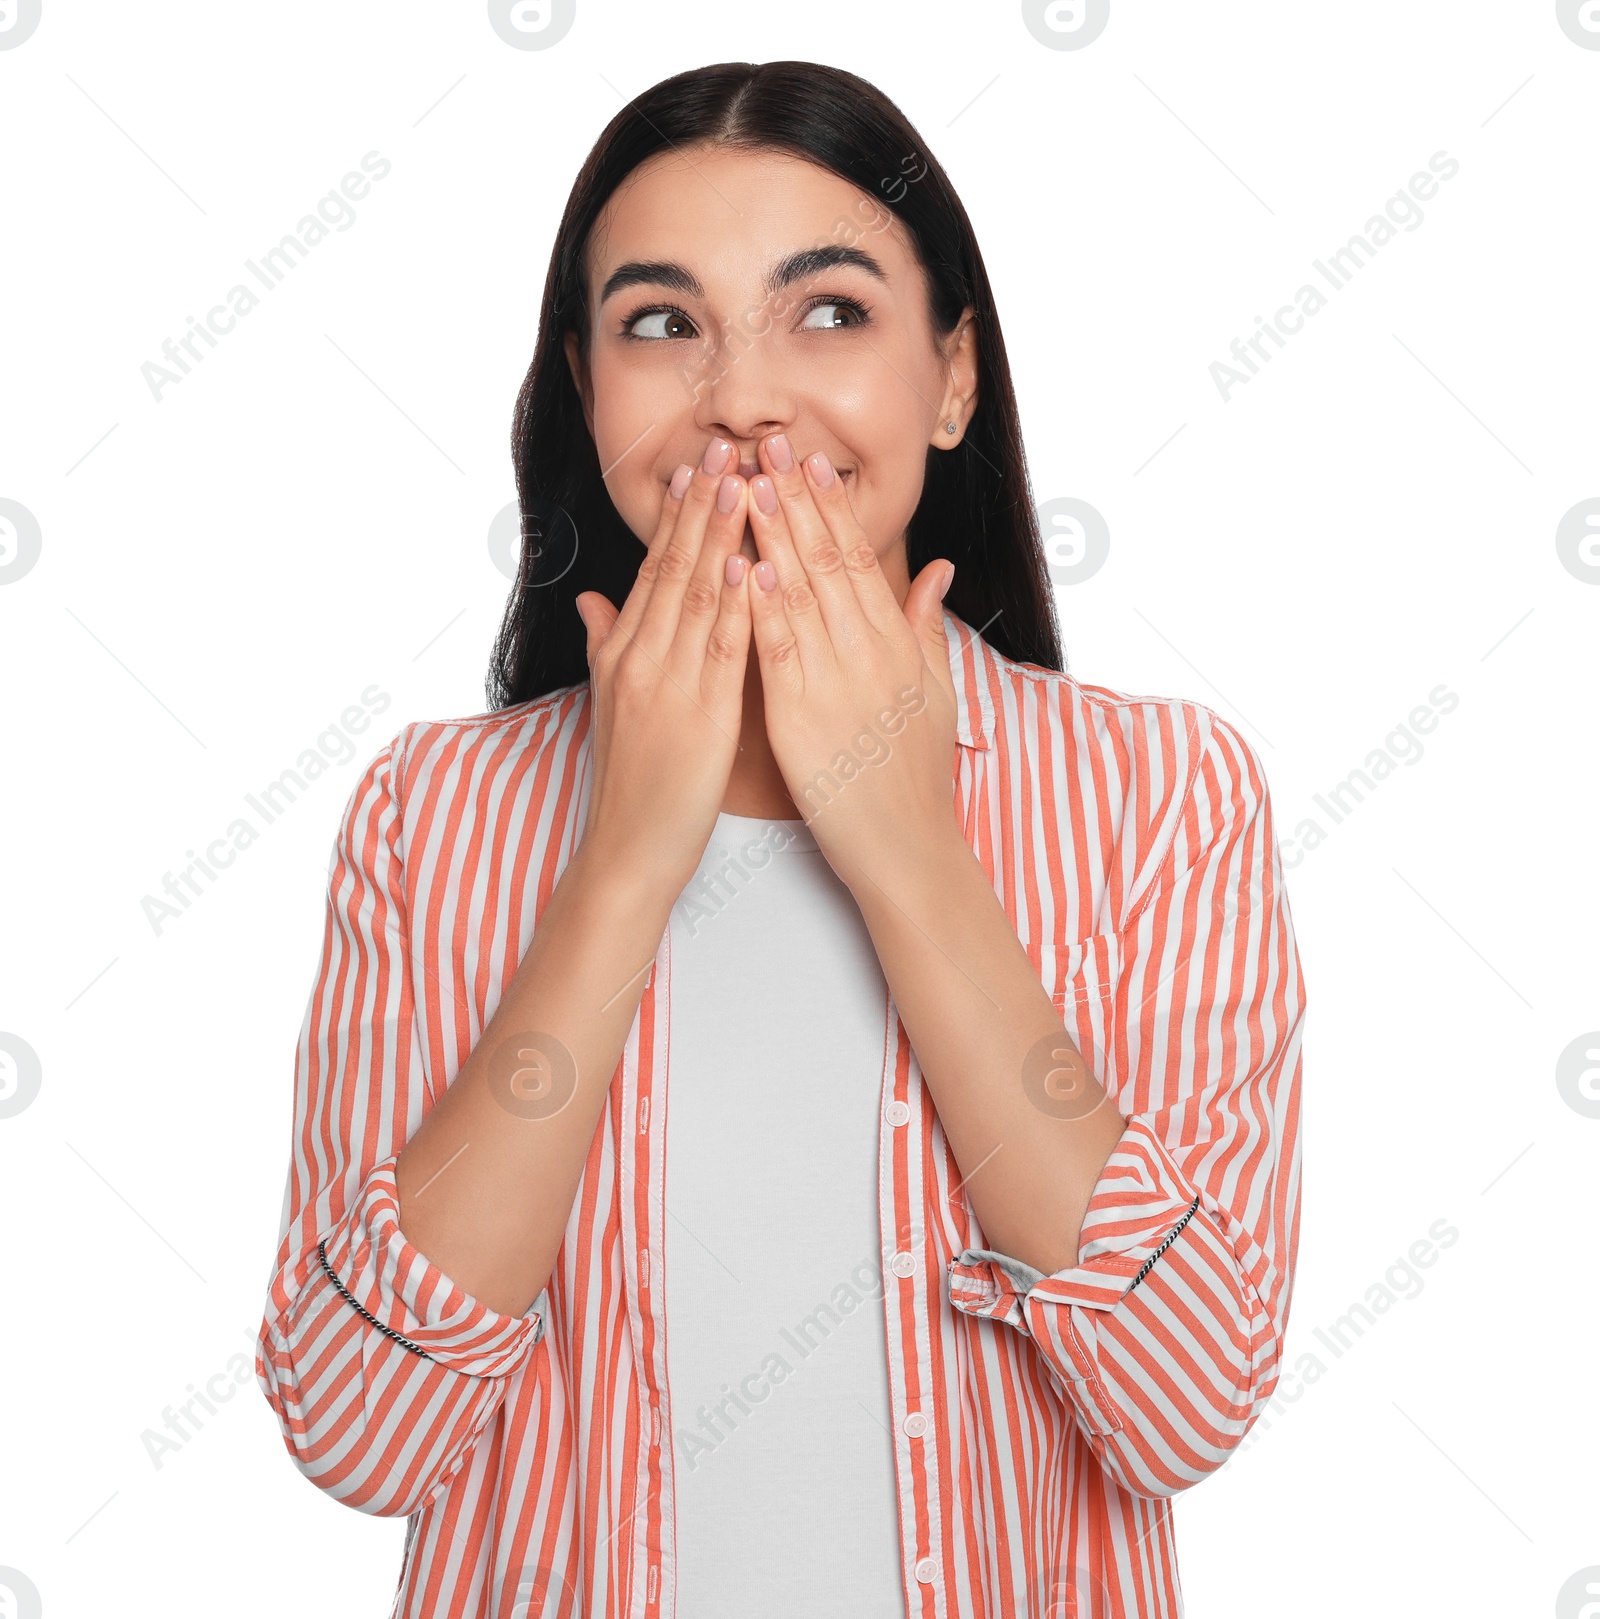 Photo of Embarrassed young woman covering mouth with hands on white background